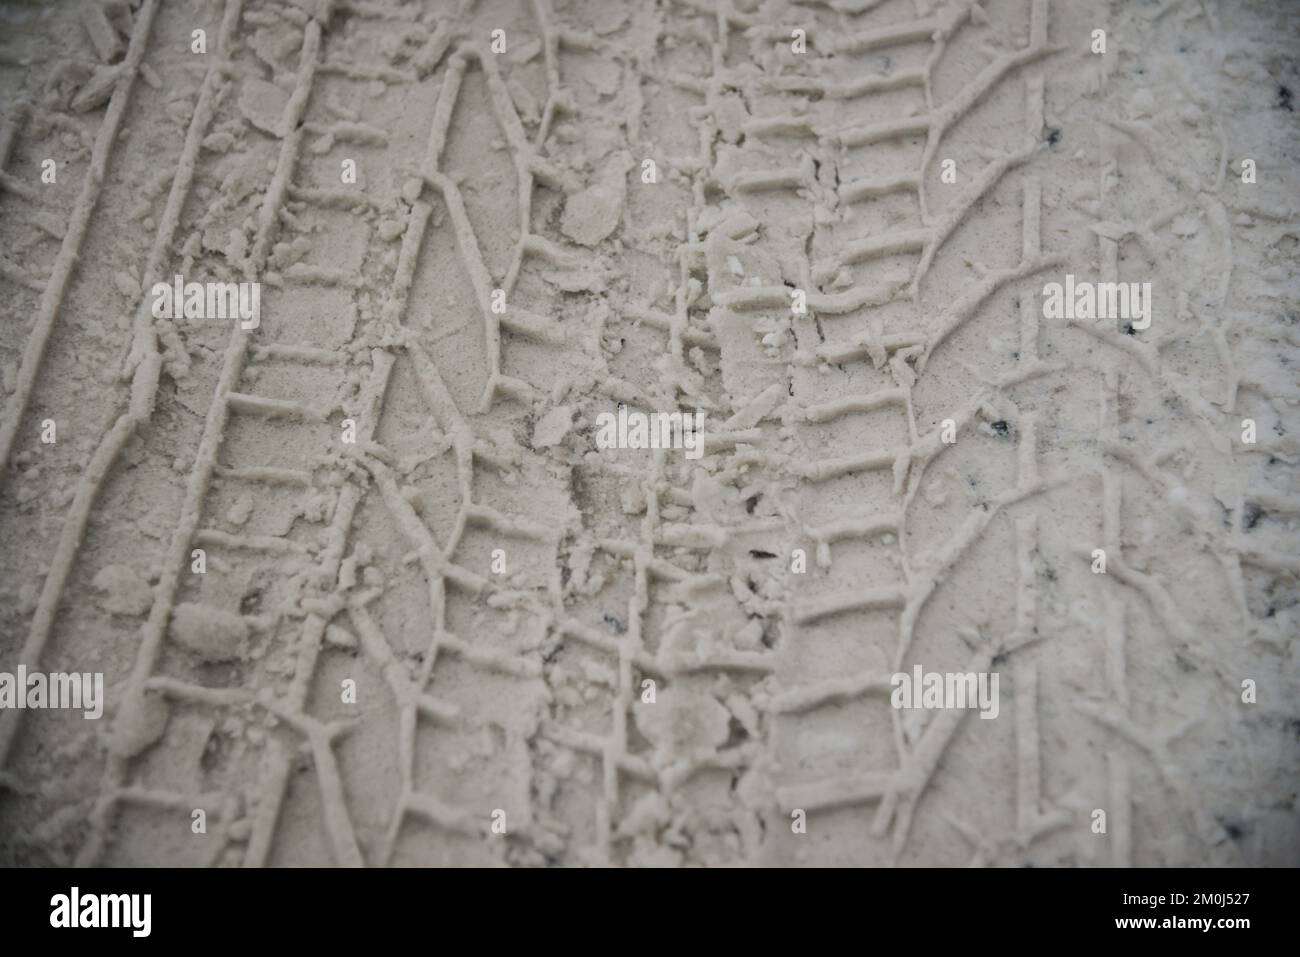 Snow tyre mark. Asphalt covered in snow. Dangerous road conditions. Car imprint on frozen ground. Tire trail on ice. Stock Photo